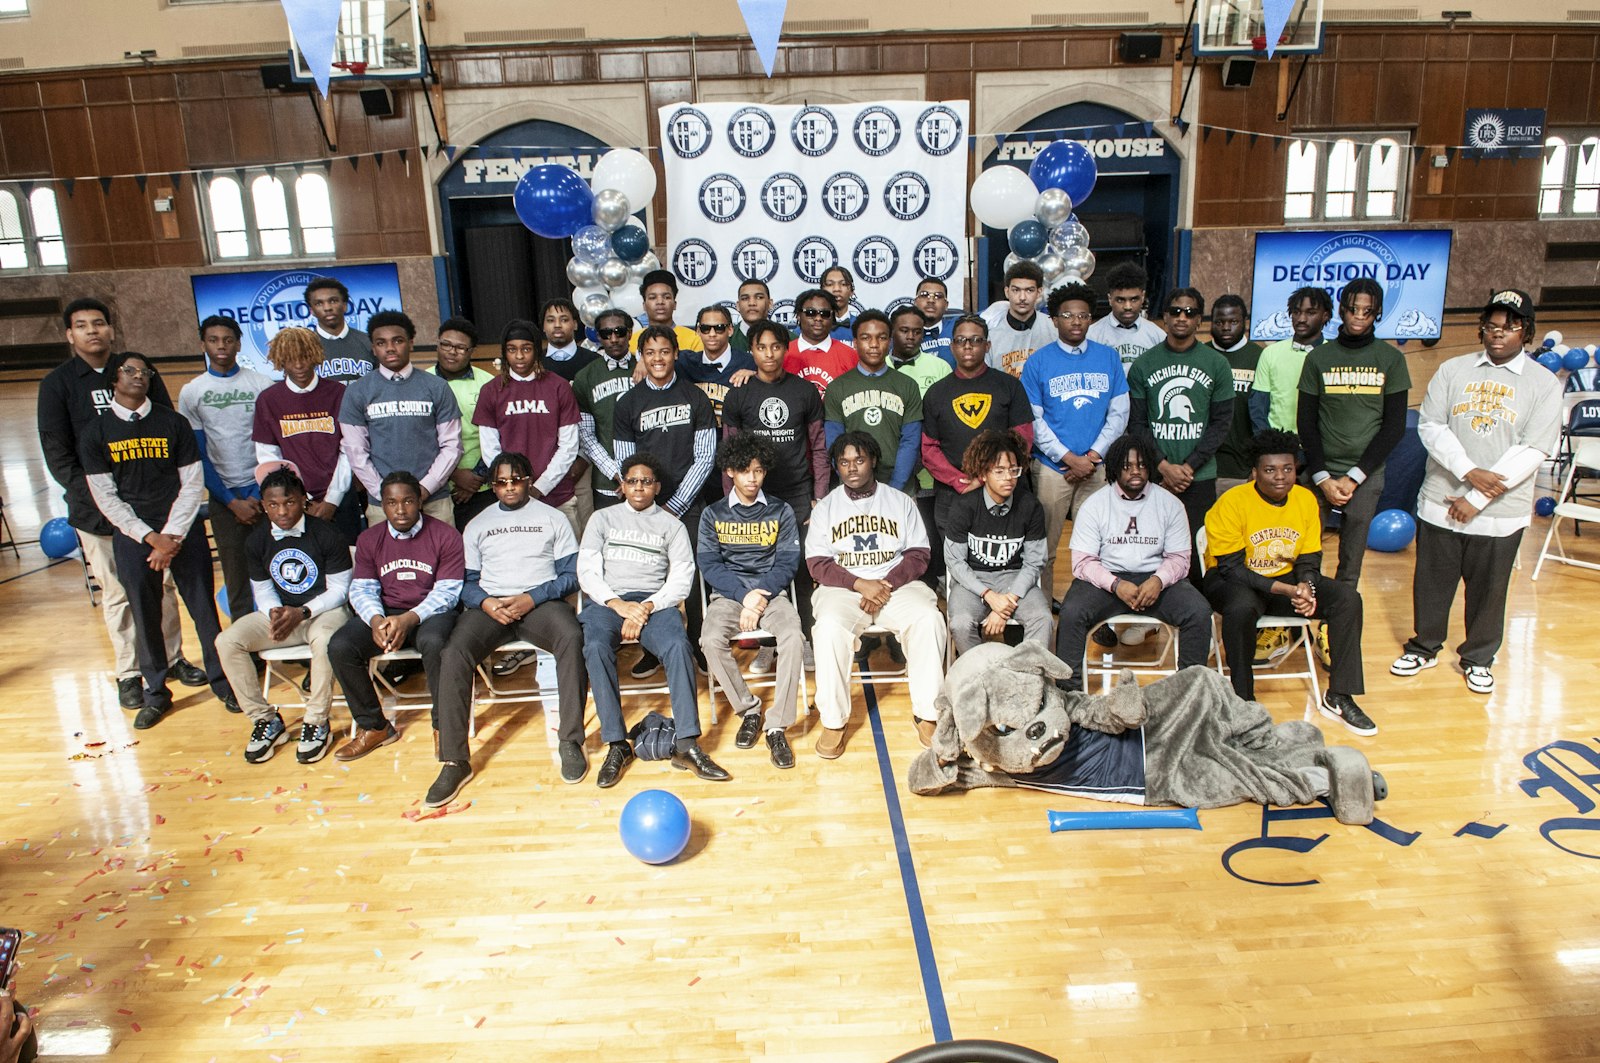 Thirty-eight seniors from Loyola High School in northwest Detroit announced their college decisions May 5 during the Jesuit school's annual "Decision Day," a celebration that also marks the school's 13th straight year of 100 percent college acceptance. Detroit Pistons announcer George Blaha was on hand to deliver opening remarks before students announced their future schools with friends and family cheering. (Photos courtesy of Loyola High School)